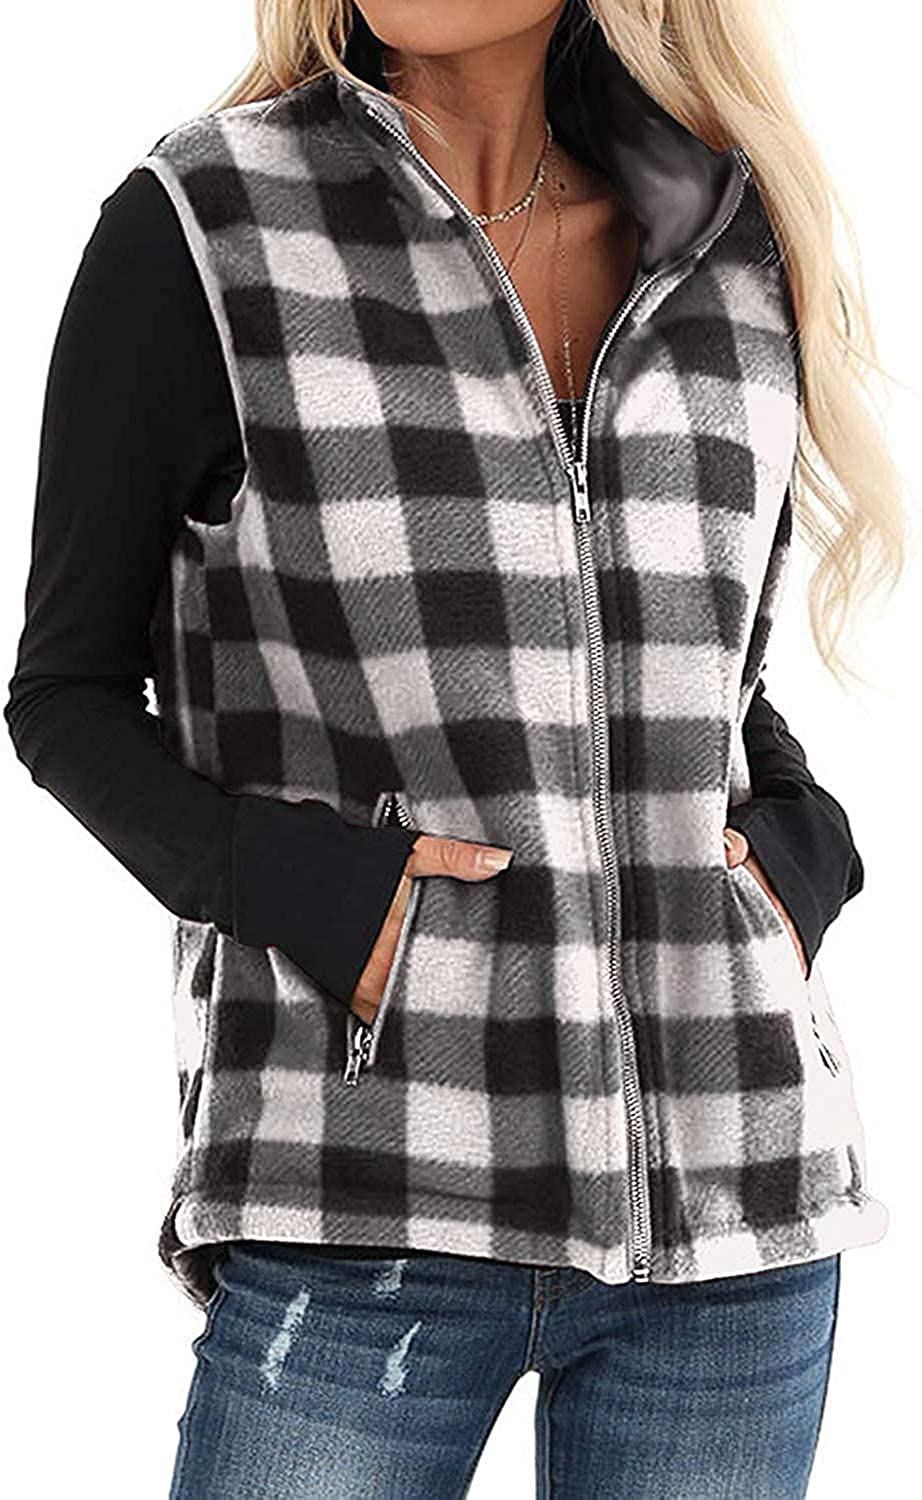 Oritina Womens Casual Lapel Open Front Plaid Vest Cardigan Coat with Pockets  | eBay